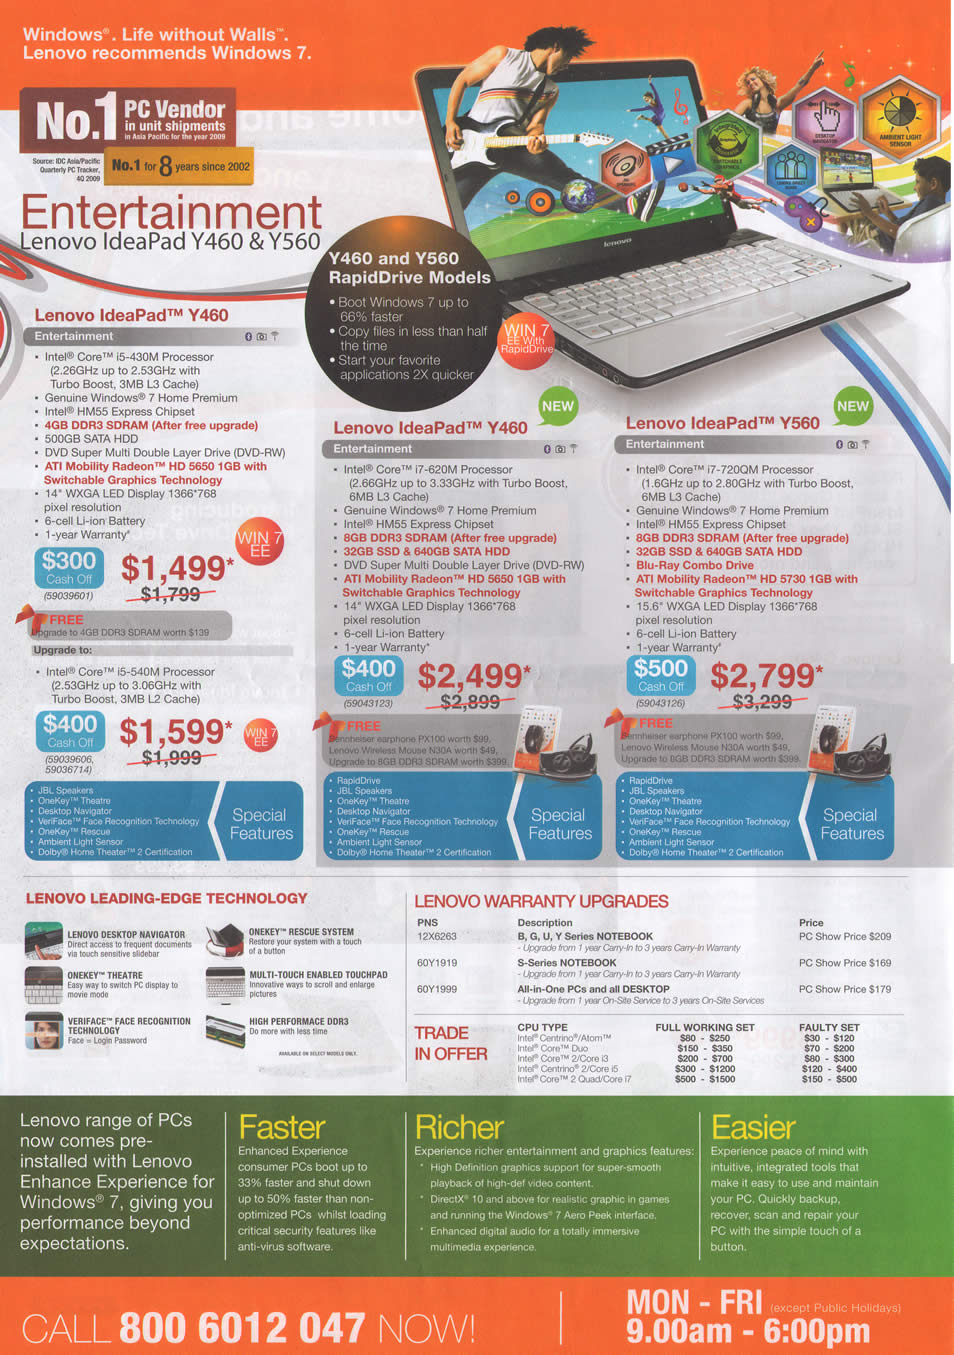 PC Show 2010 price list image brochure of Lenovo Notebooks IdeaPad Y460 Y560